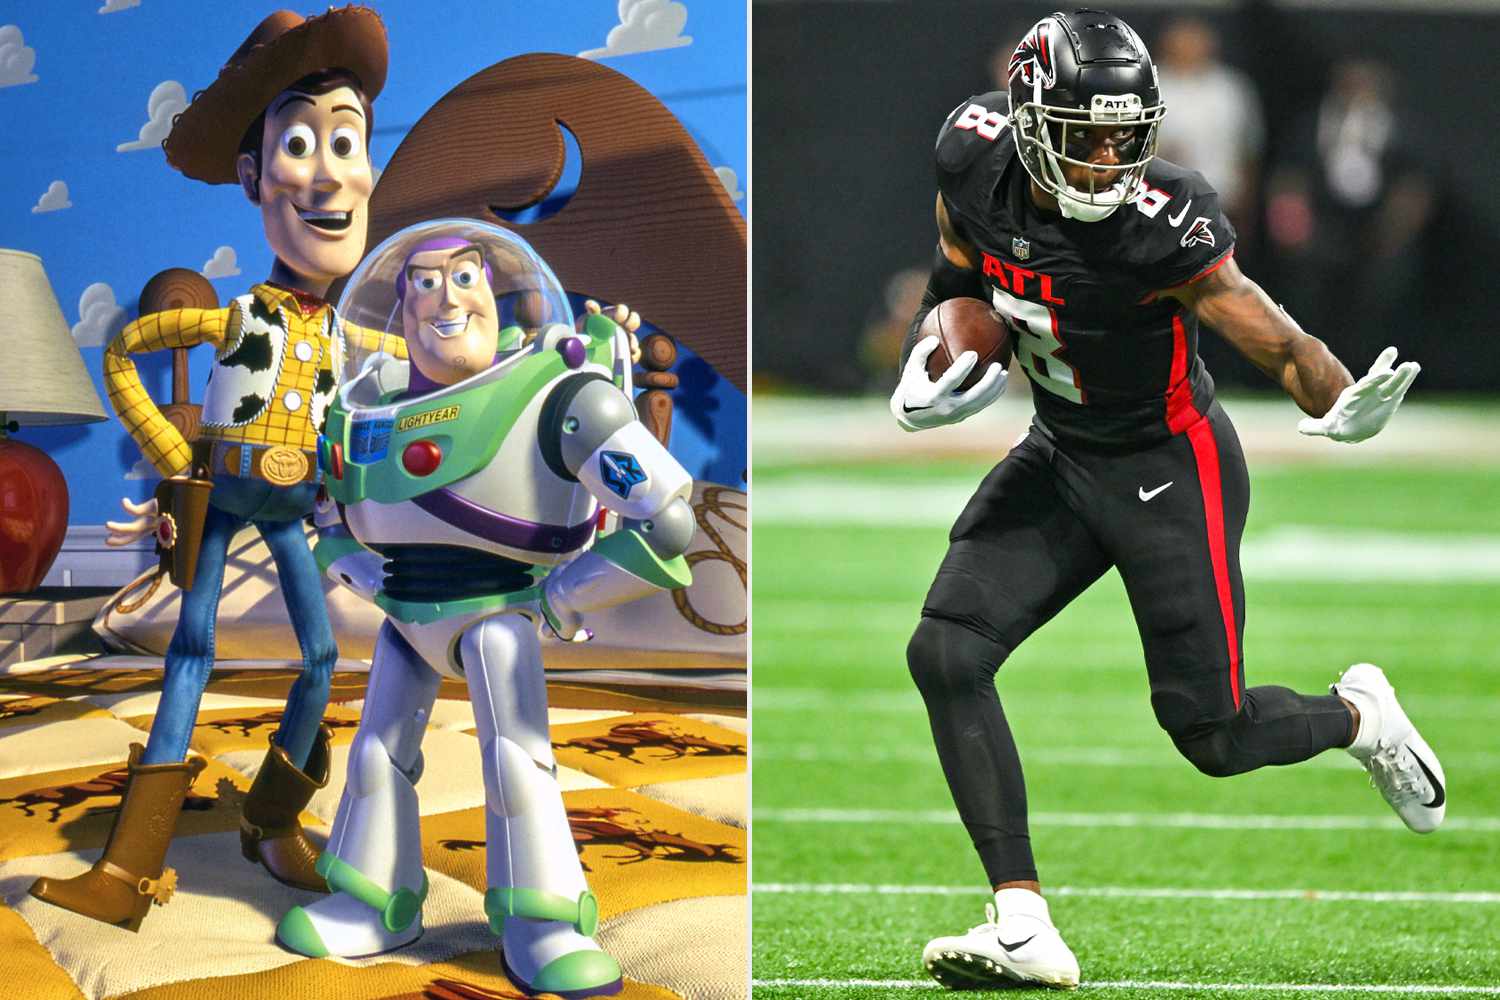 Woody and Buzz in 'Toy Story'; Kyle Pitt of the Atlanta Falcons